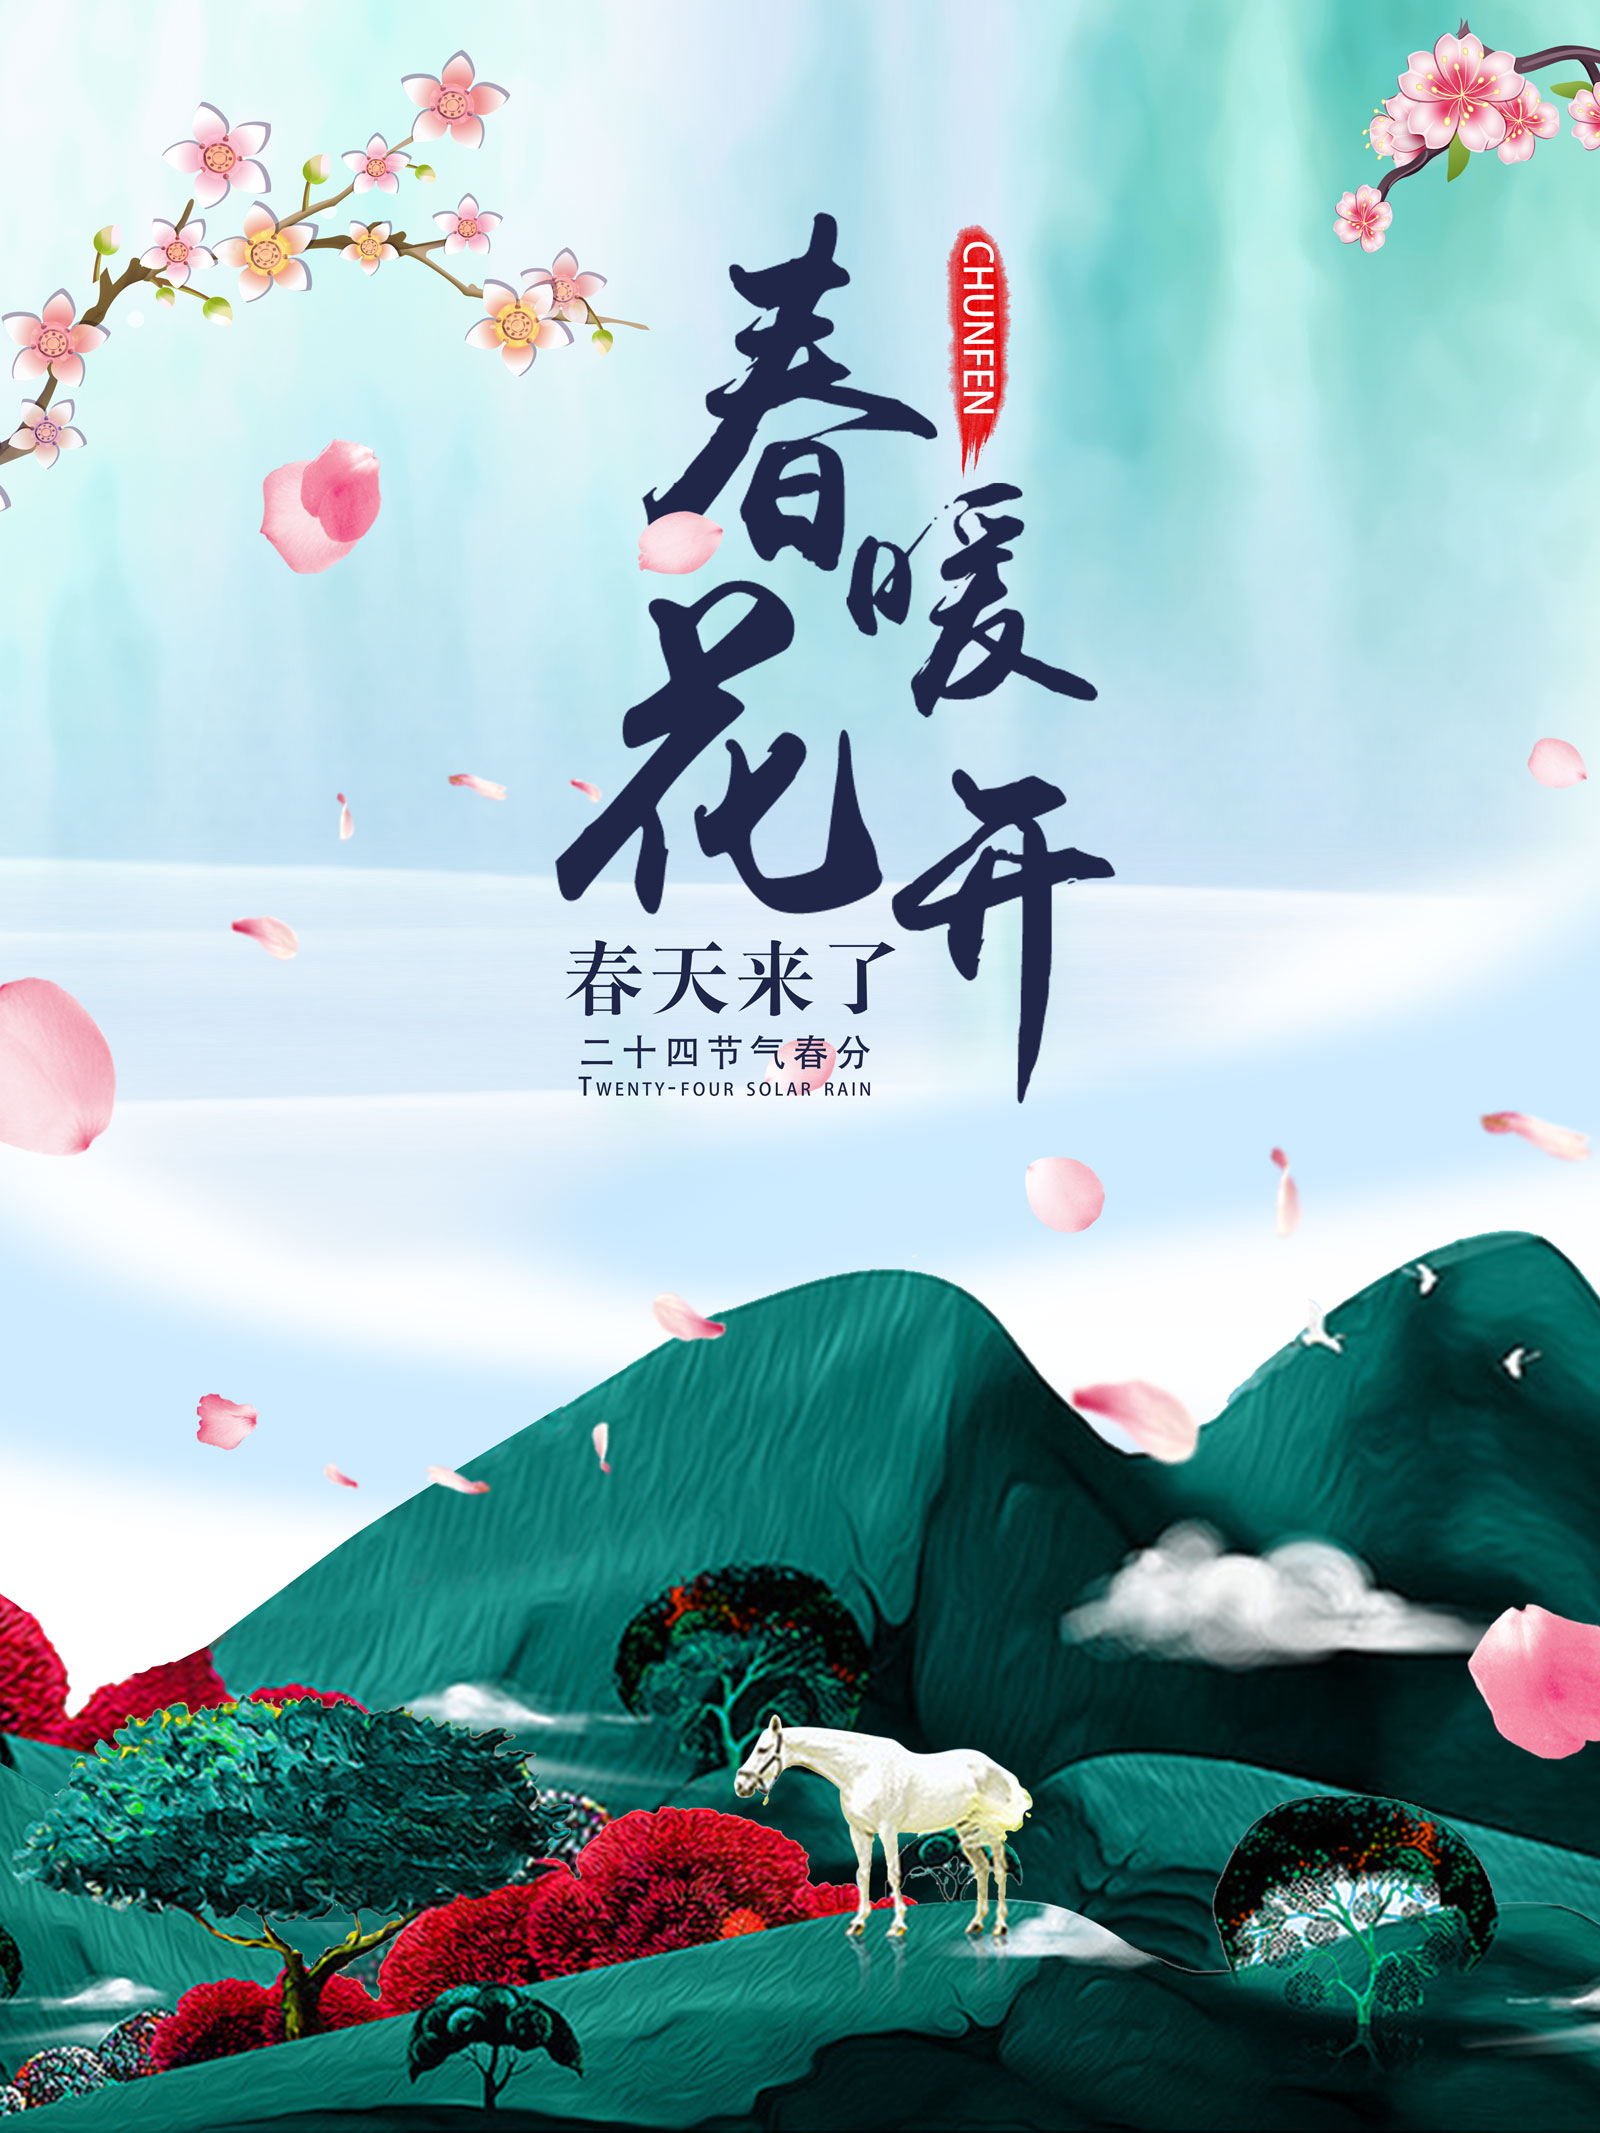 The flowers blossom in the spring - China PSD File Free Download